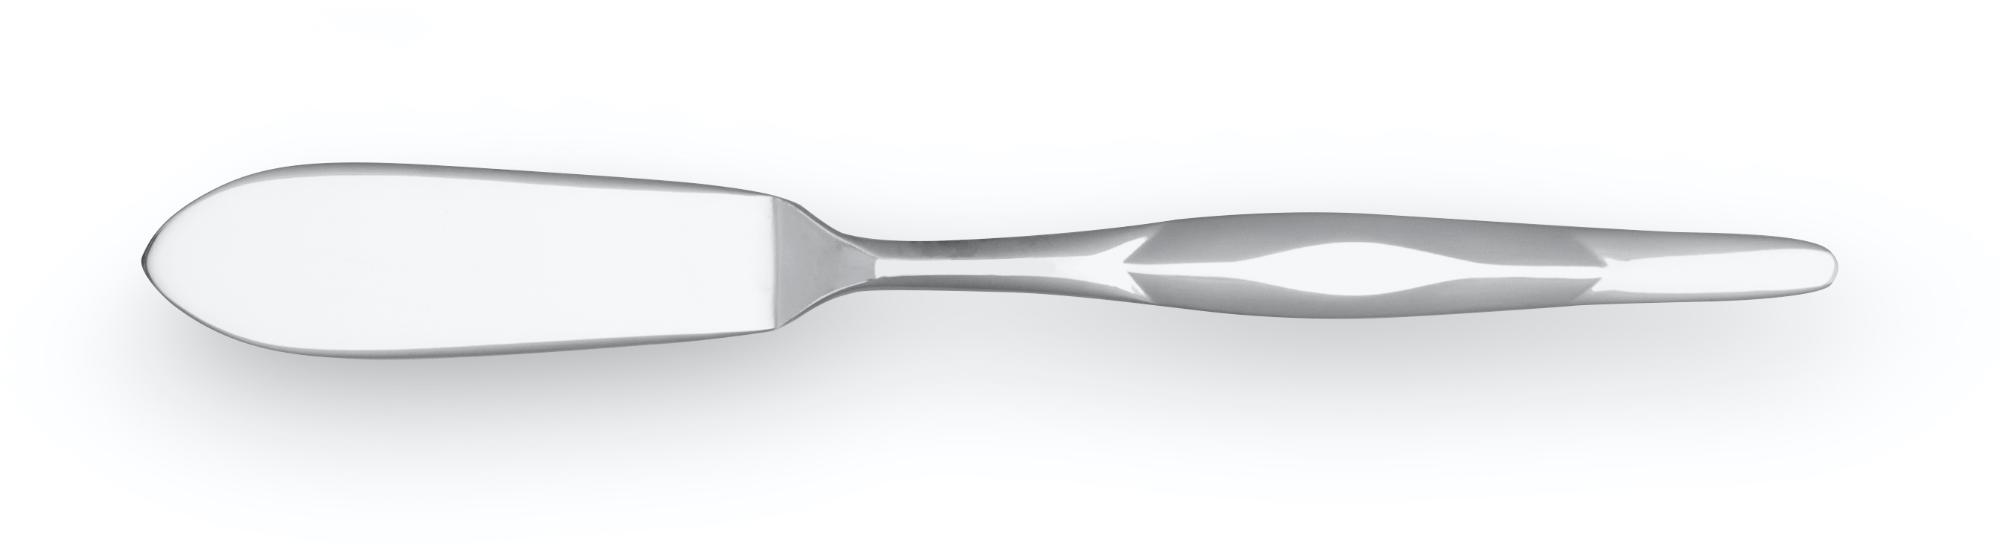 Stainless Butter Knife